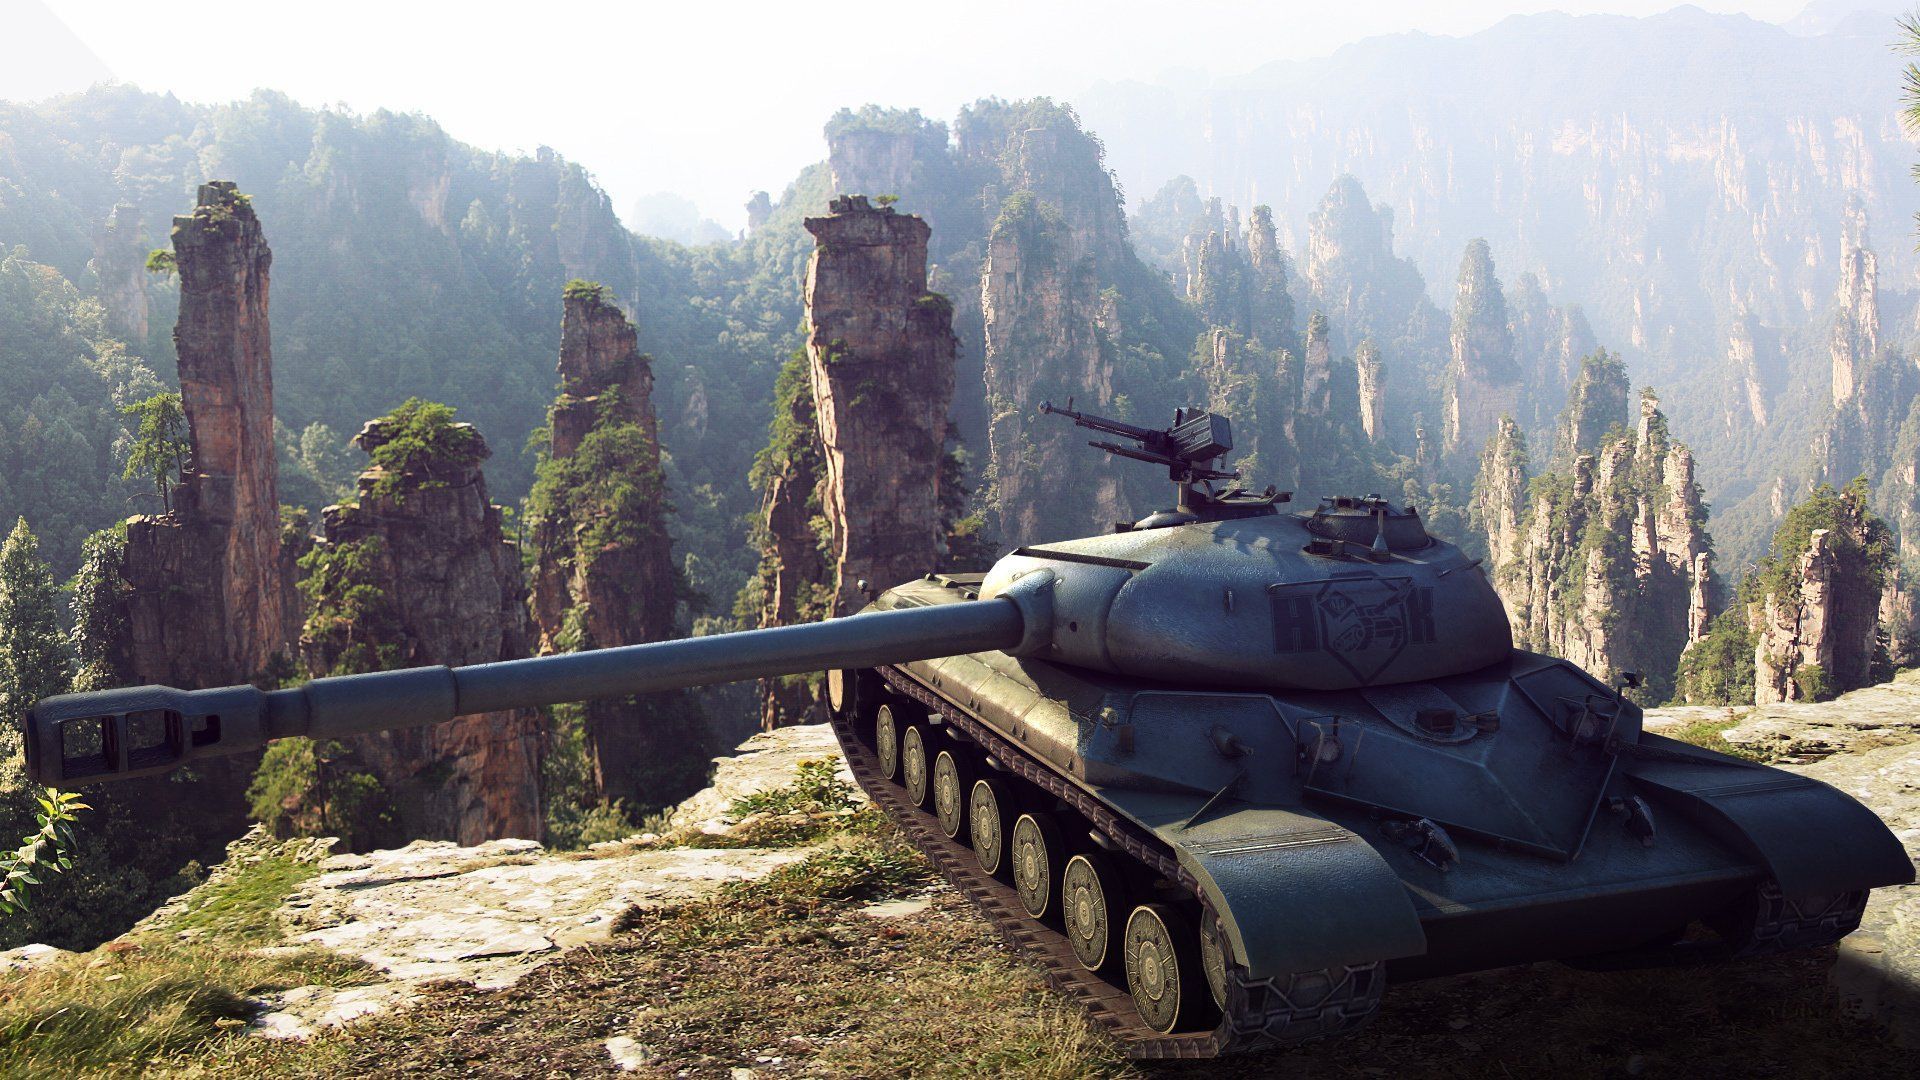 World Of Tanks HD Wallpapers, World Of Tanks Images, New Backgrounds